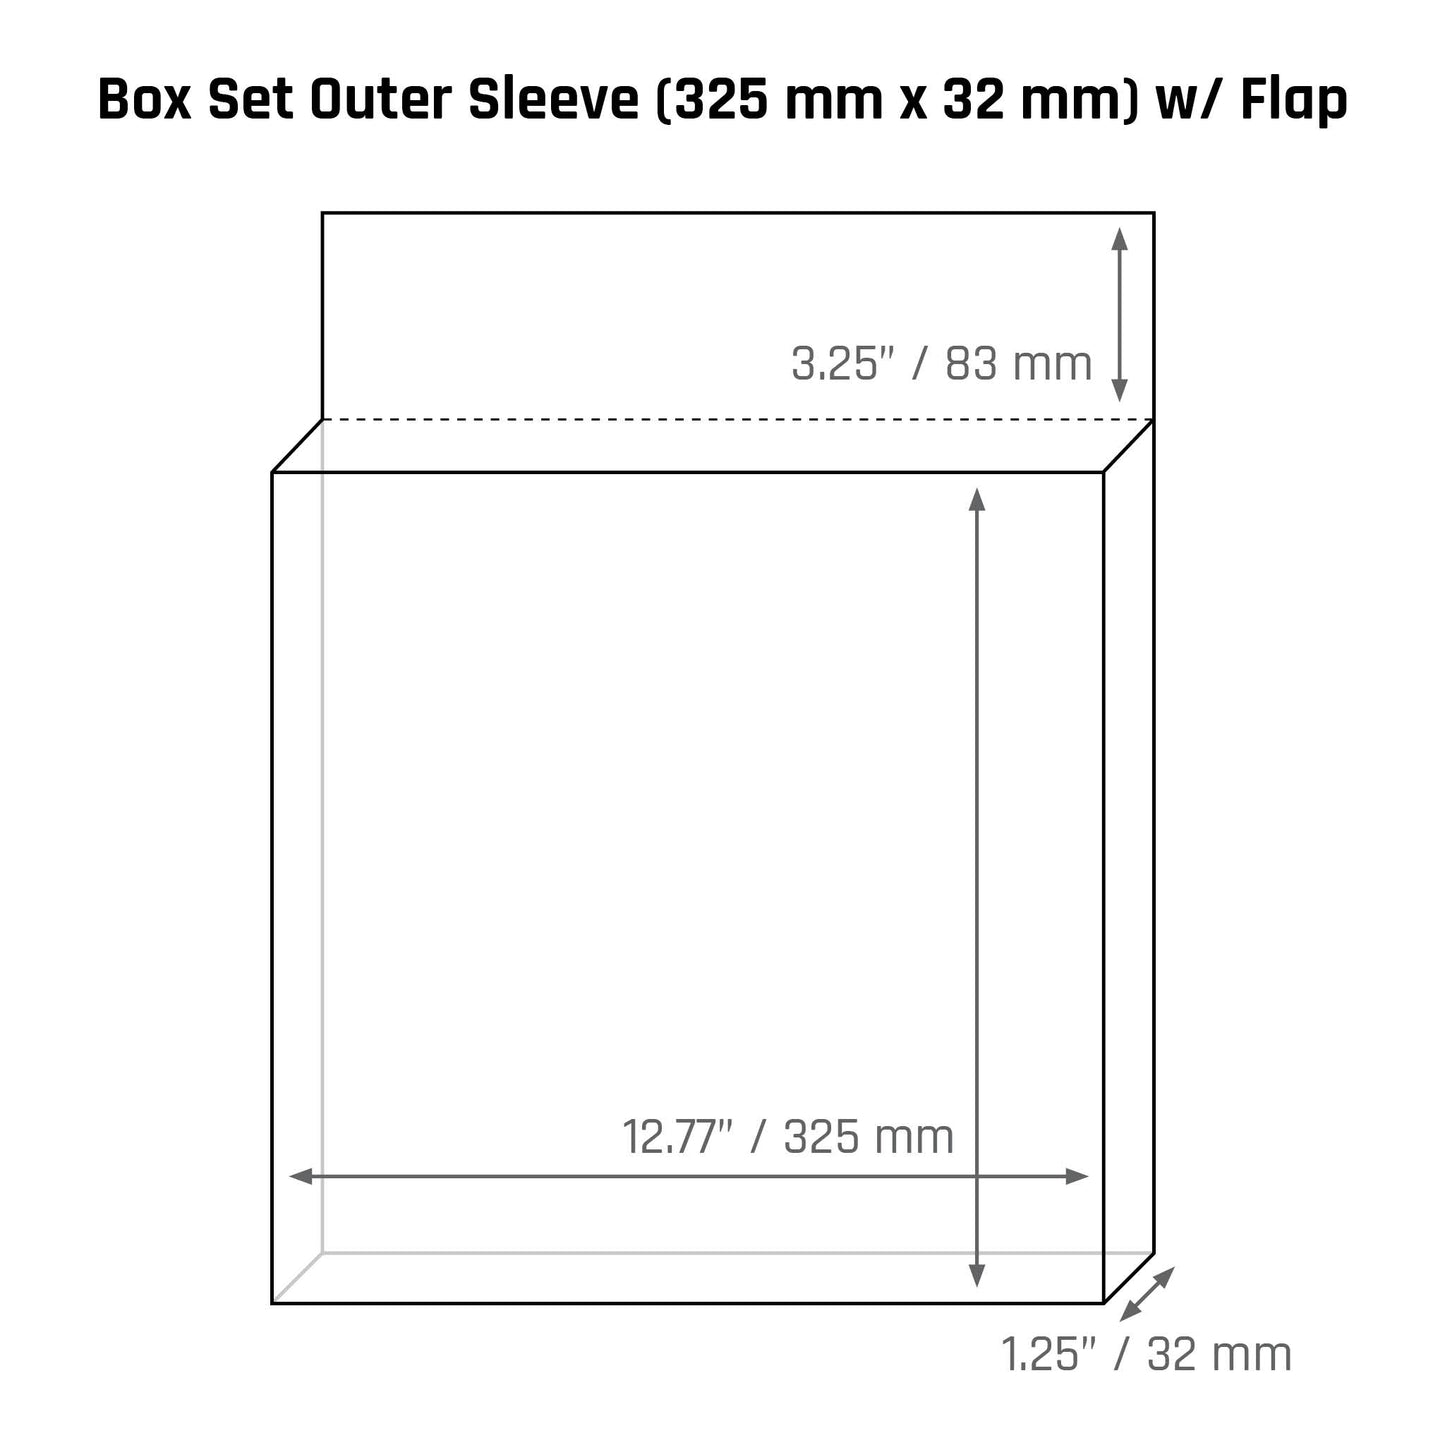 Box Set Outer Sleeve (325 mm x 32 mm) - 3mil